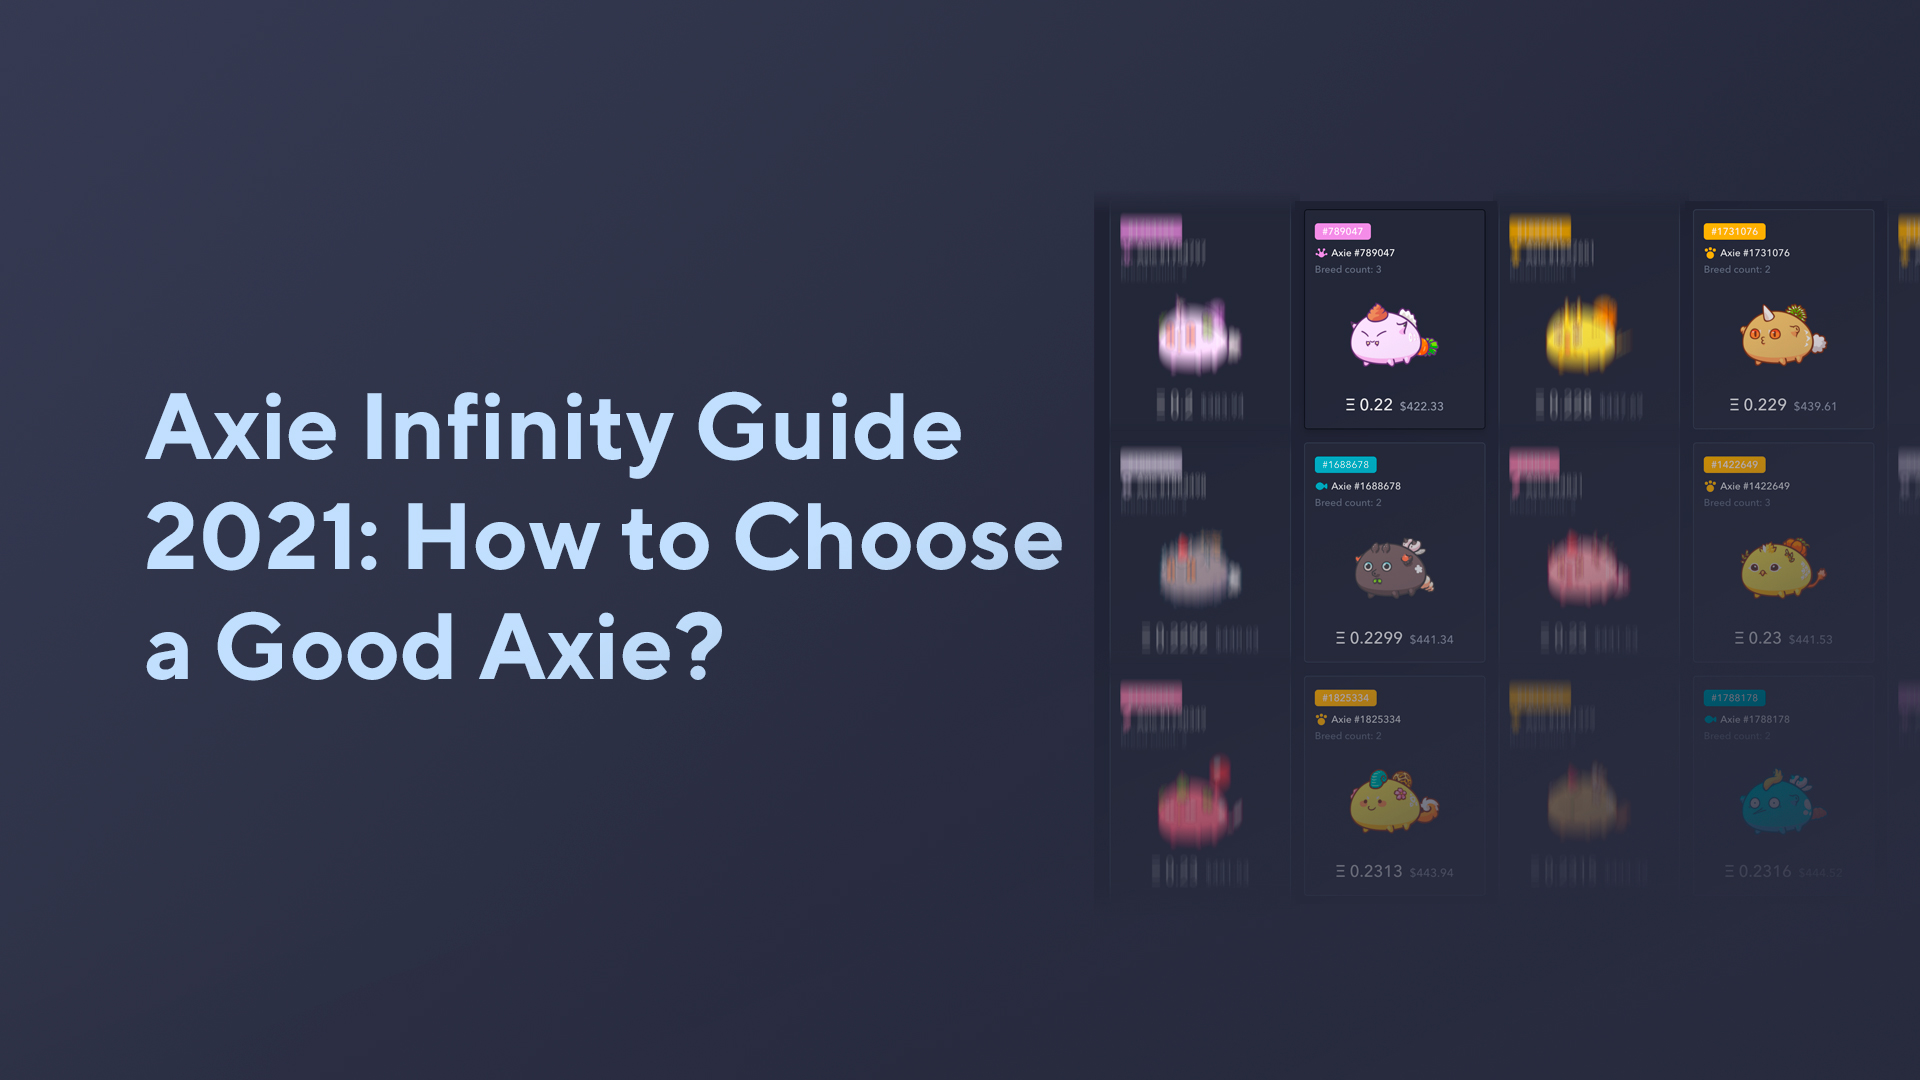 Axie Infinity Guide 2021: How to Choose a Good Axie?